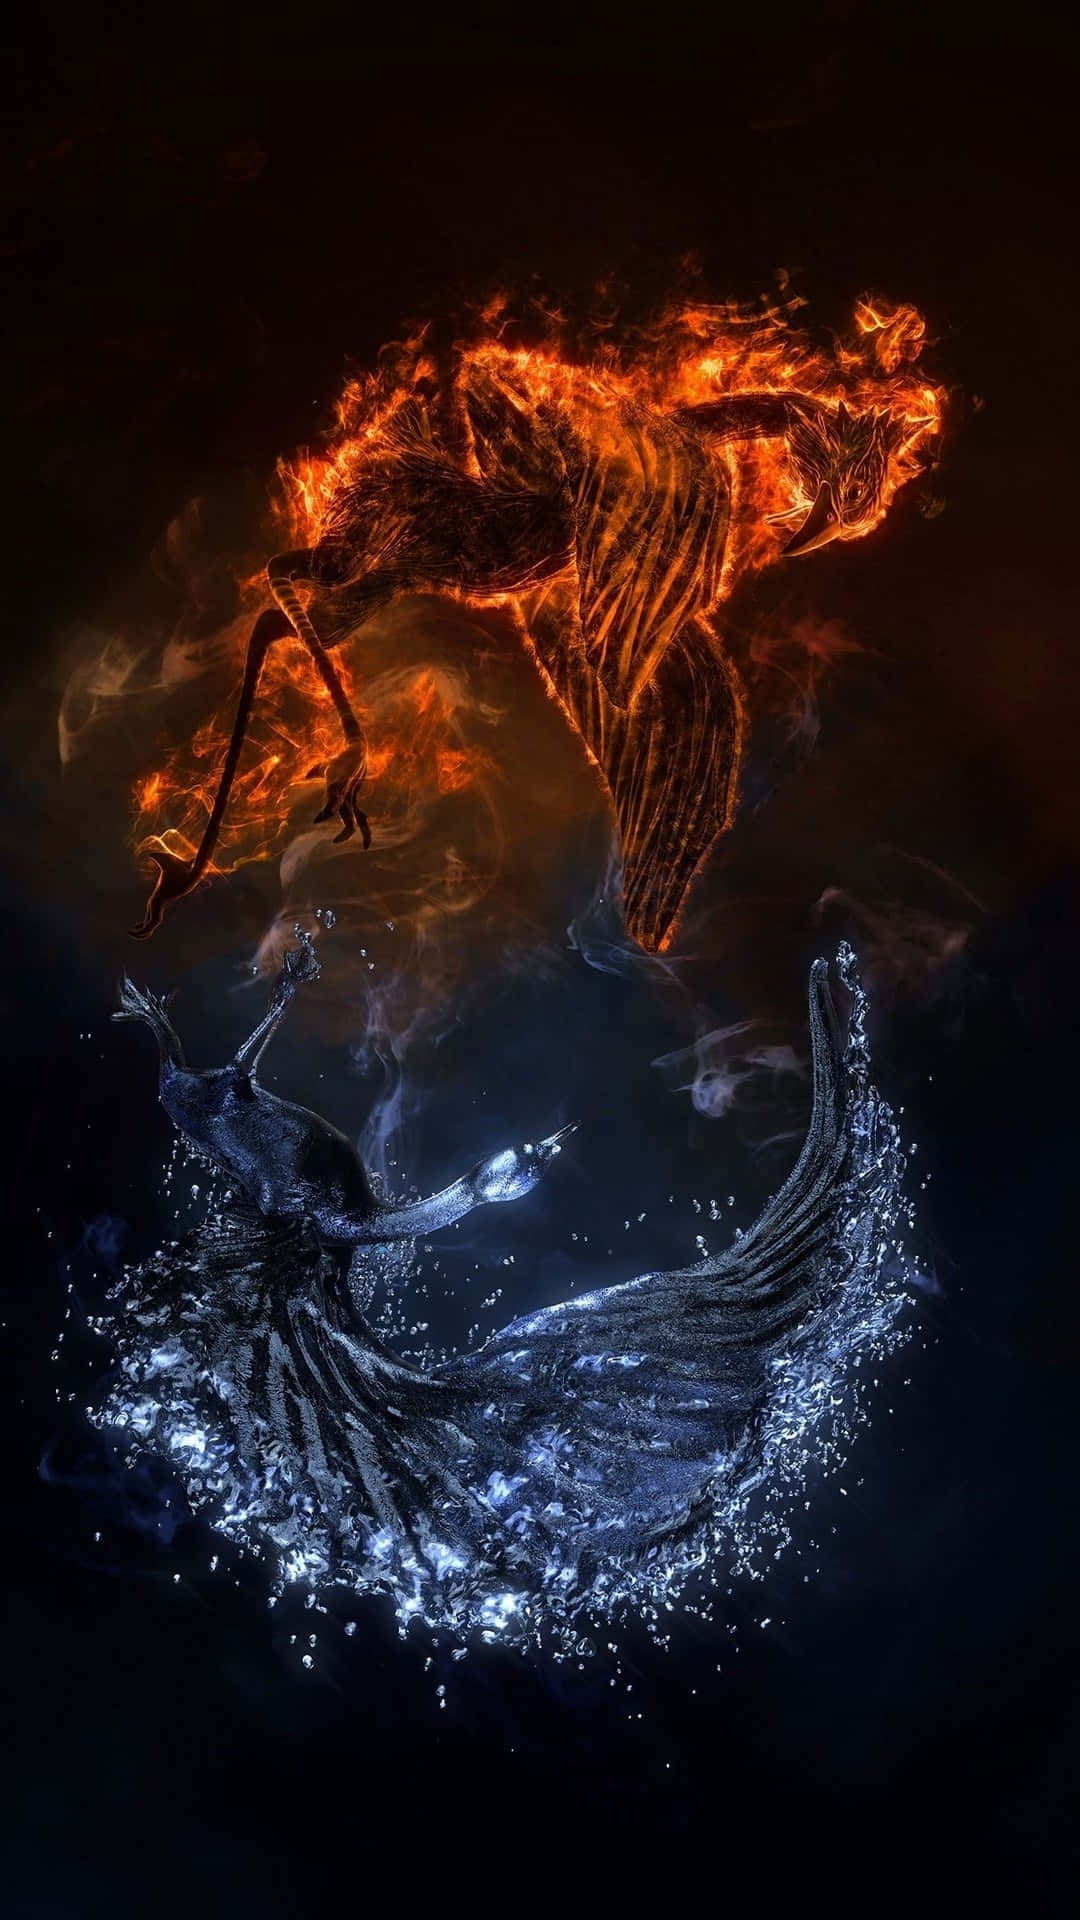 Fire and water: a beautiful contrast of power and serenity Wallpaper